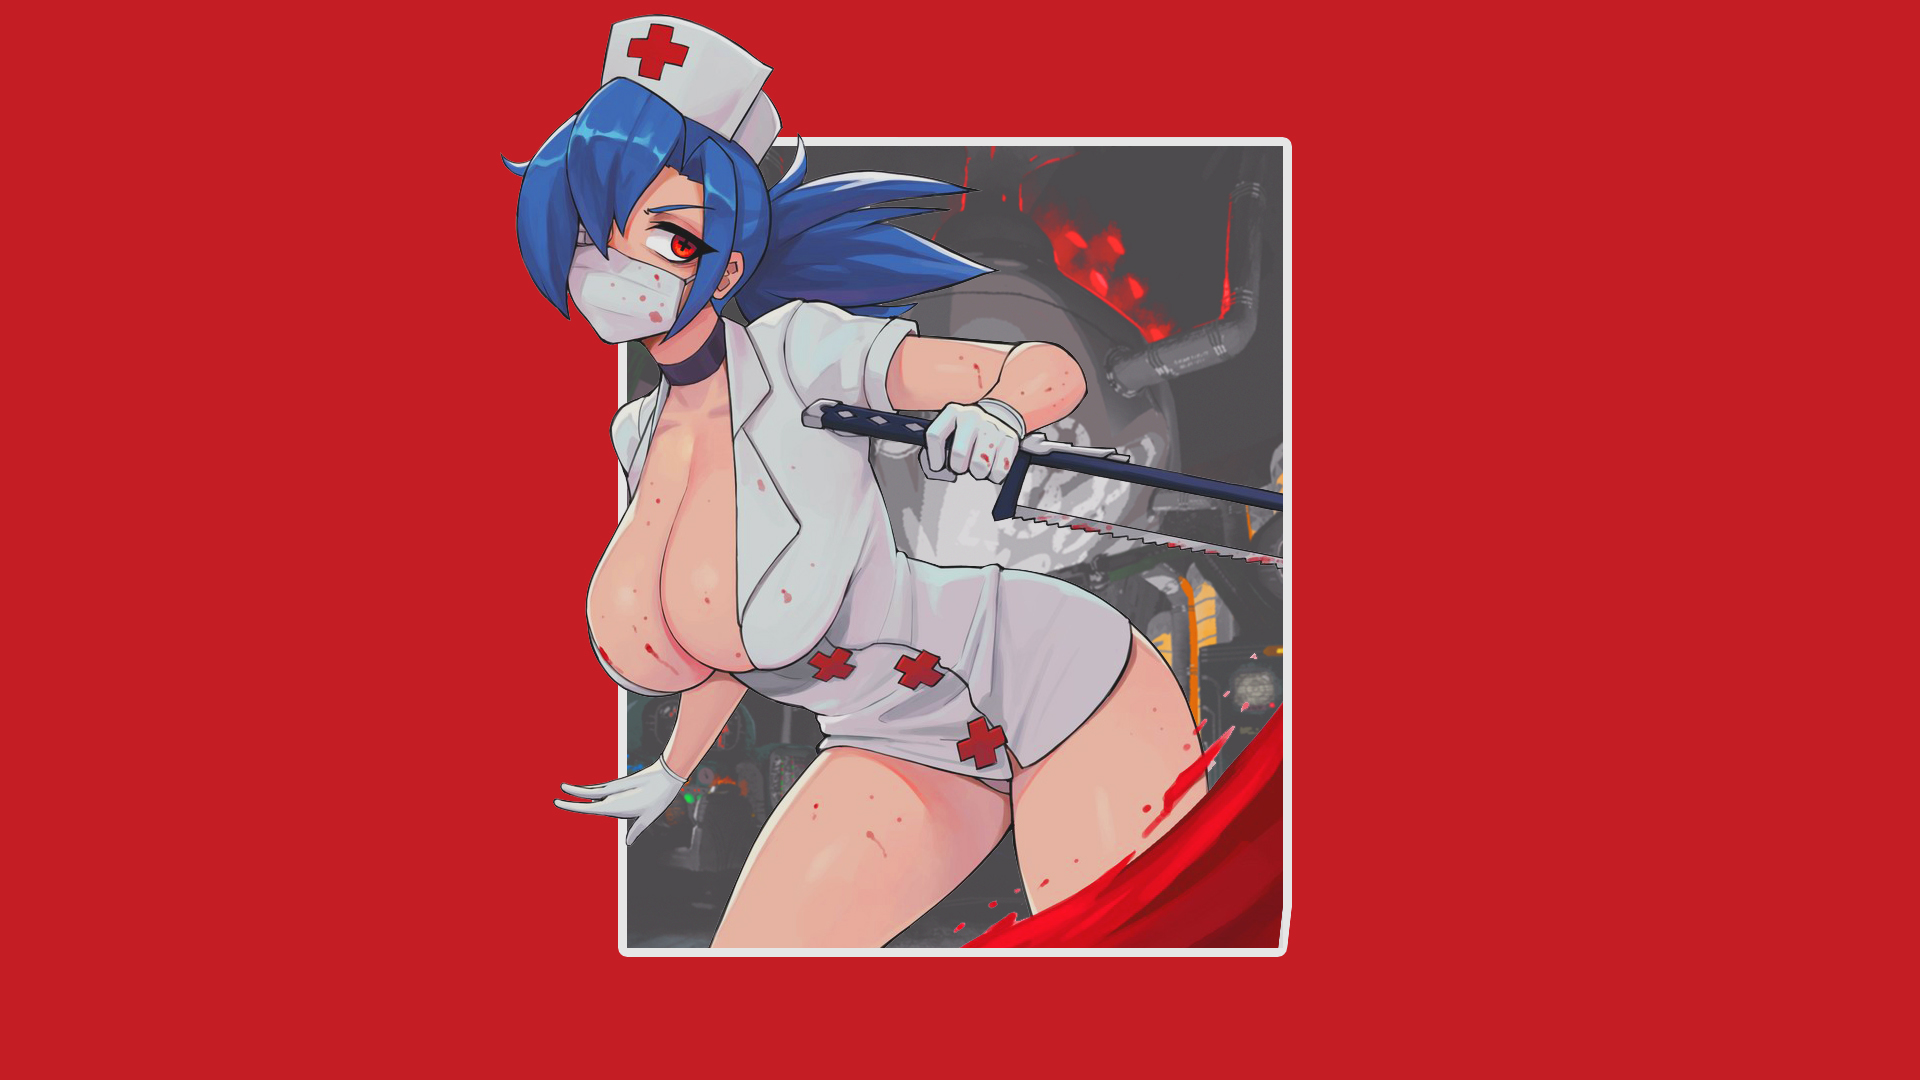 Anime 1920x1080 anime anime girls simple background picture-in-picture big boobs boobs huge breasts no bra cleavage nurse outfit blue hair red eyes ponytail Skullgirls Valentine Valentine (Skullgirls)